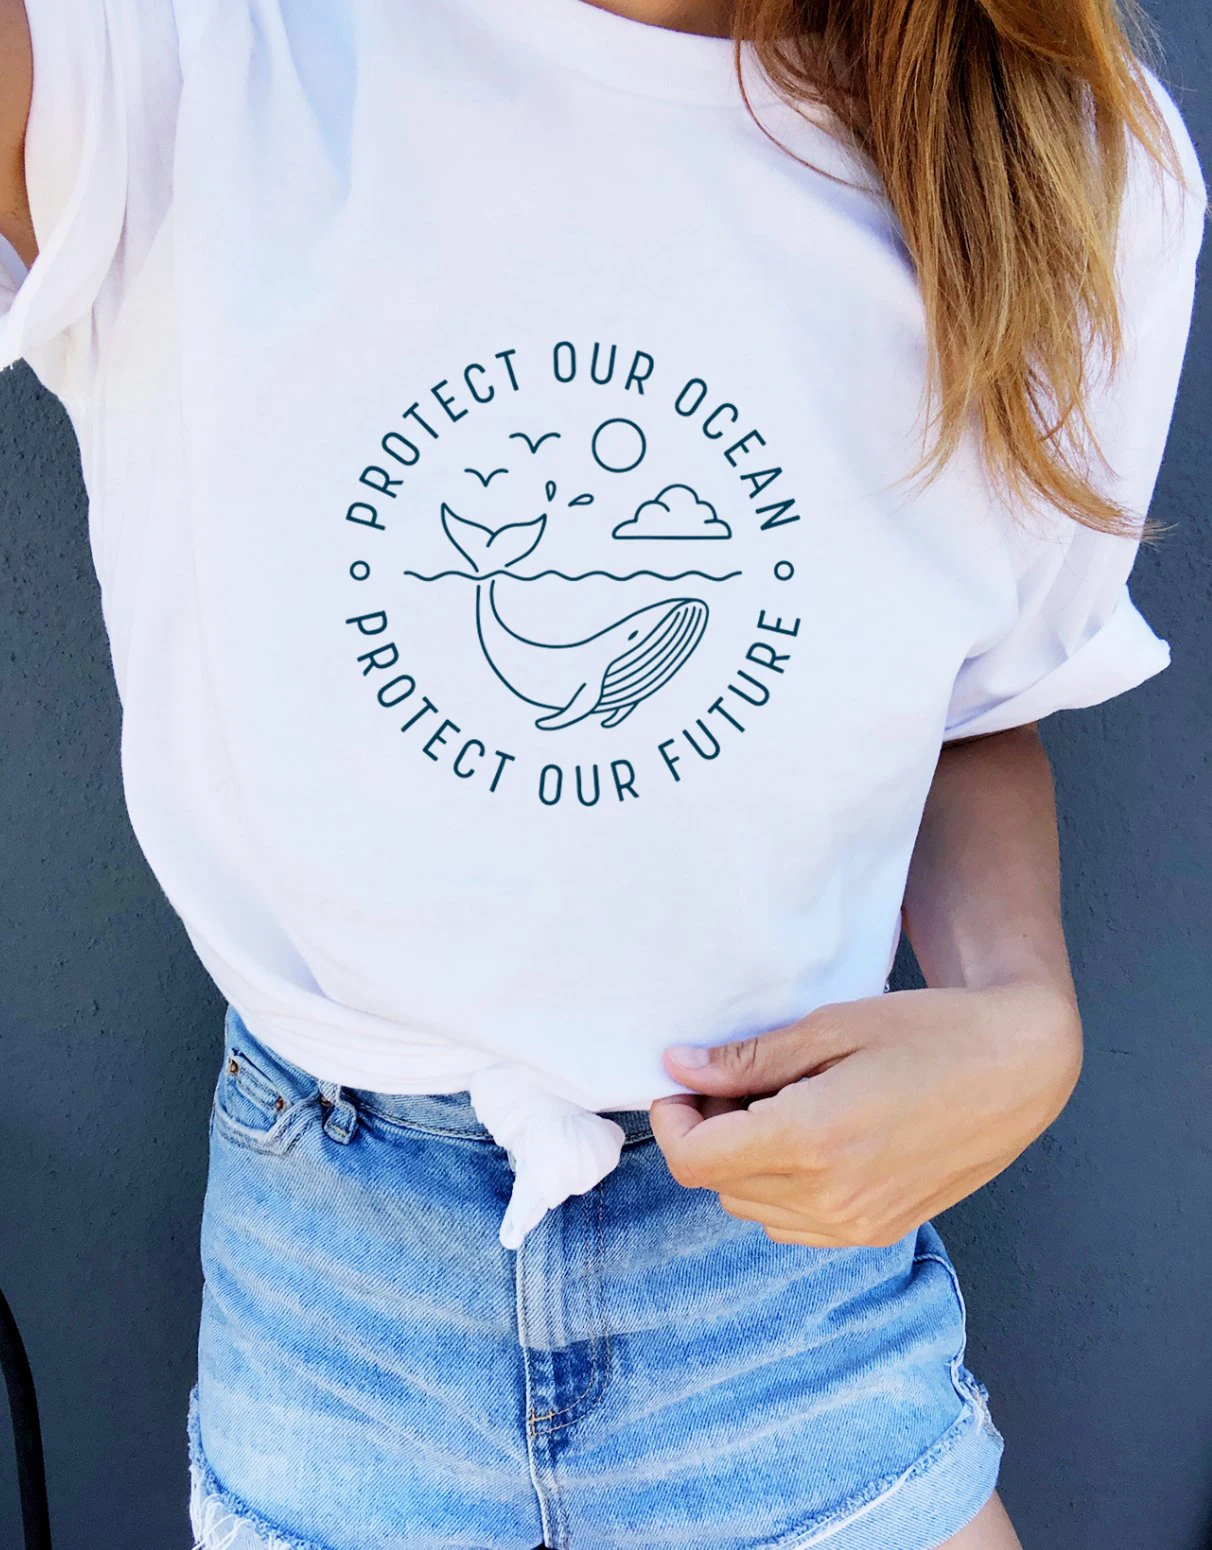 

Protect Our Ocean Protect Our Future Slogan Women Tops Tees White Summer Short Sleeved Tshirts Tumblr Vintage Graphic T Shirt